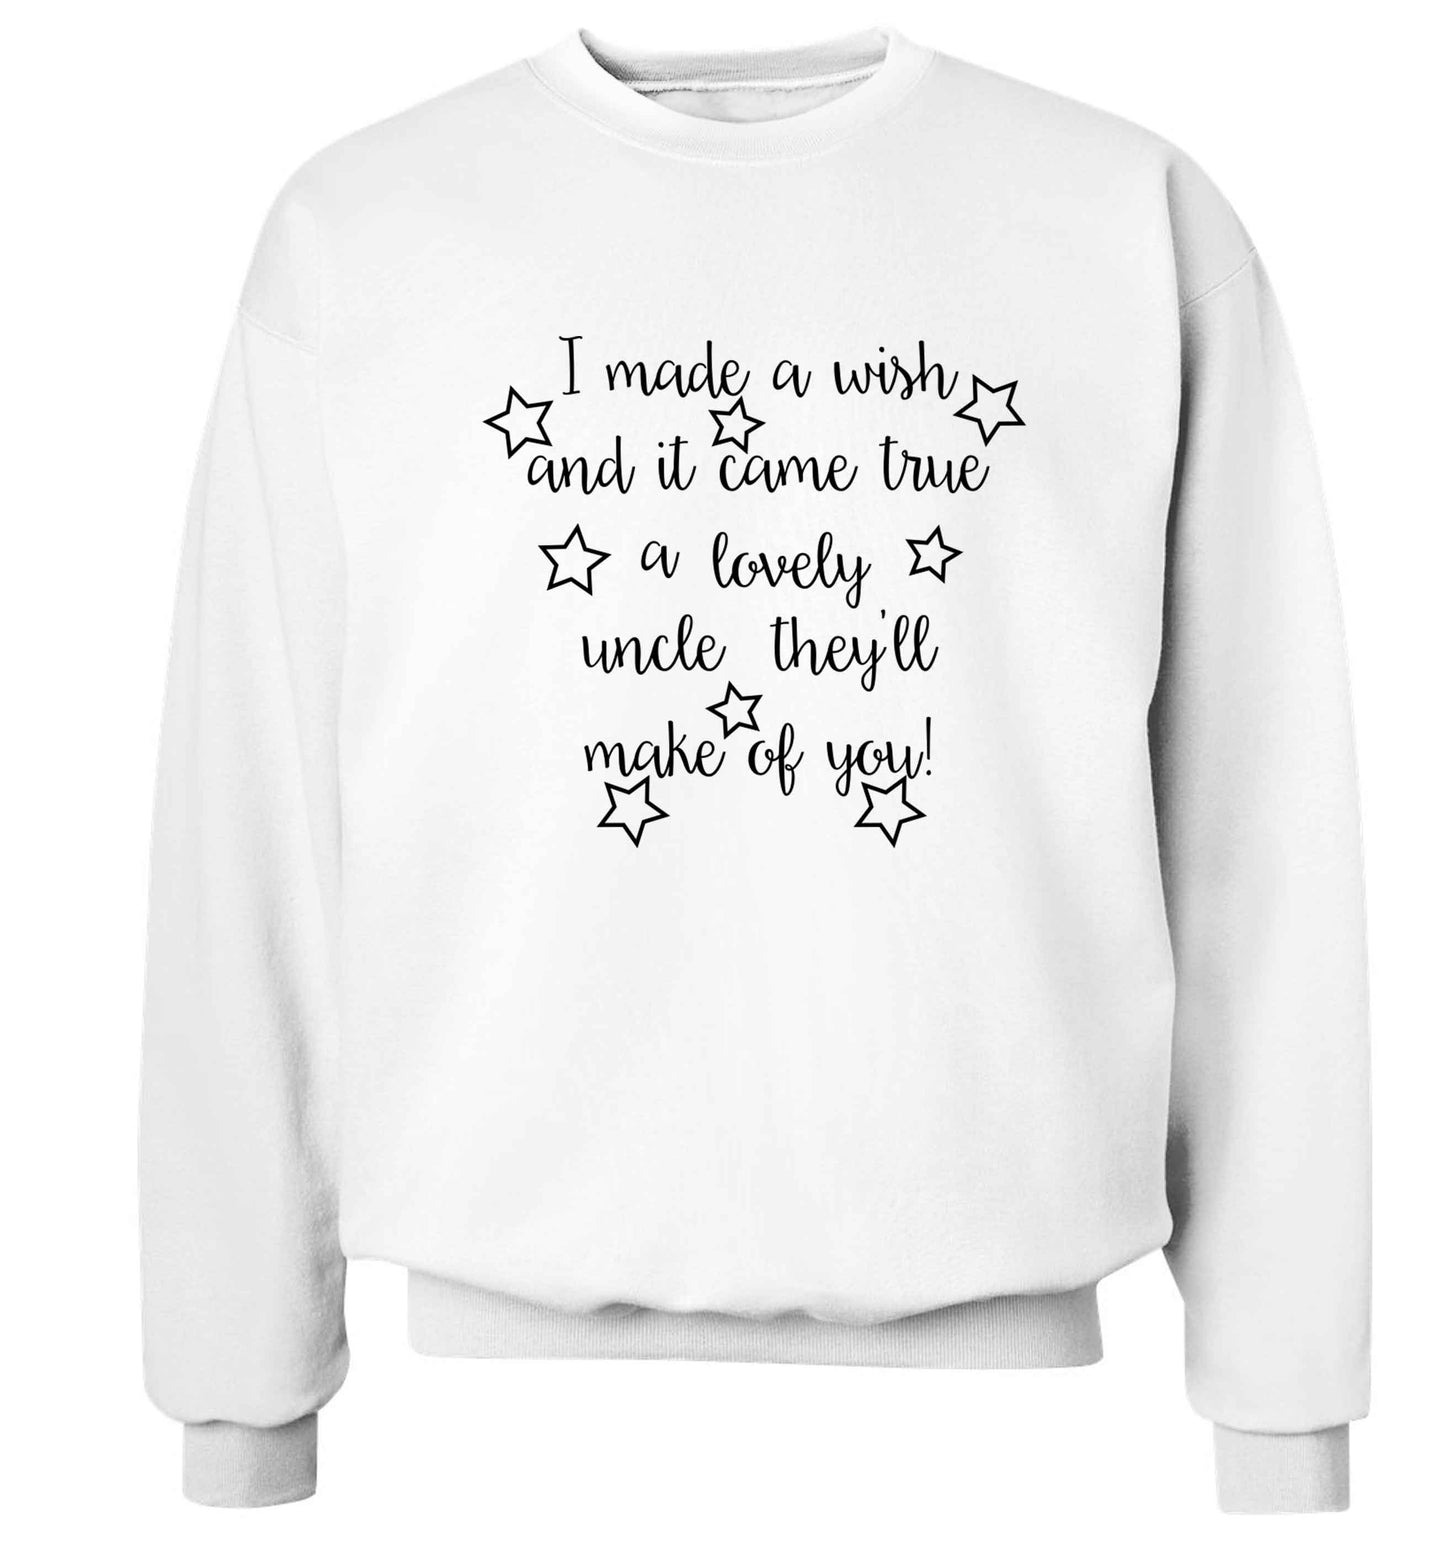 I made a wish and it came true a lovely uncle they'll make of you! Adult's unisex white Sweater 2XL